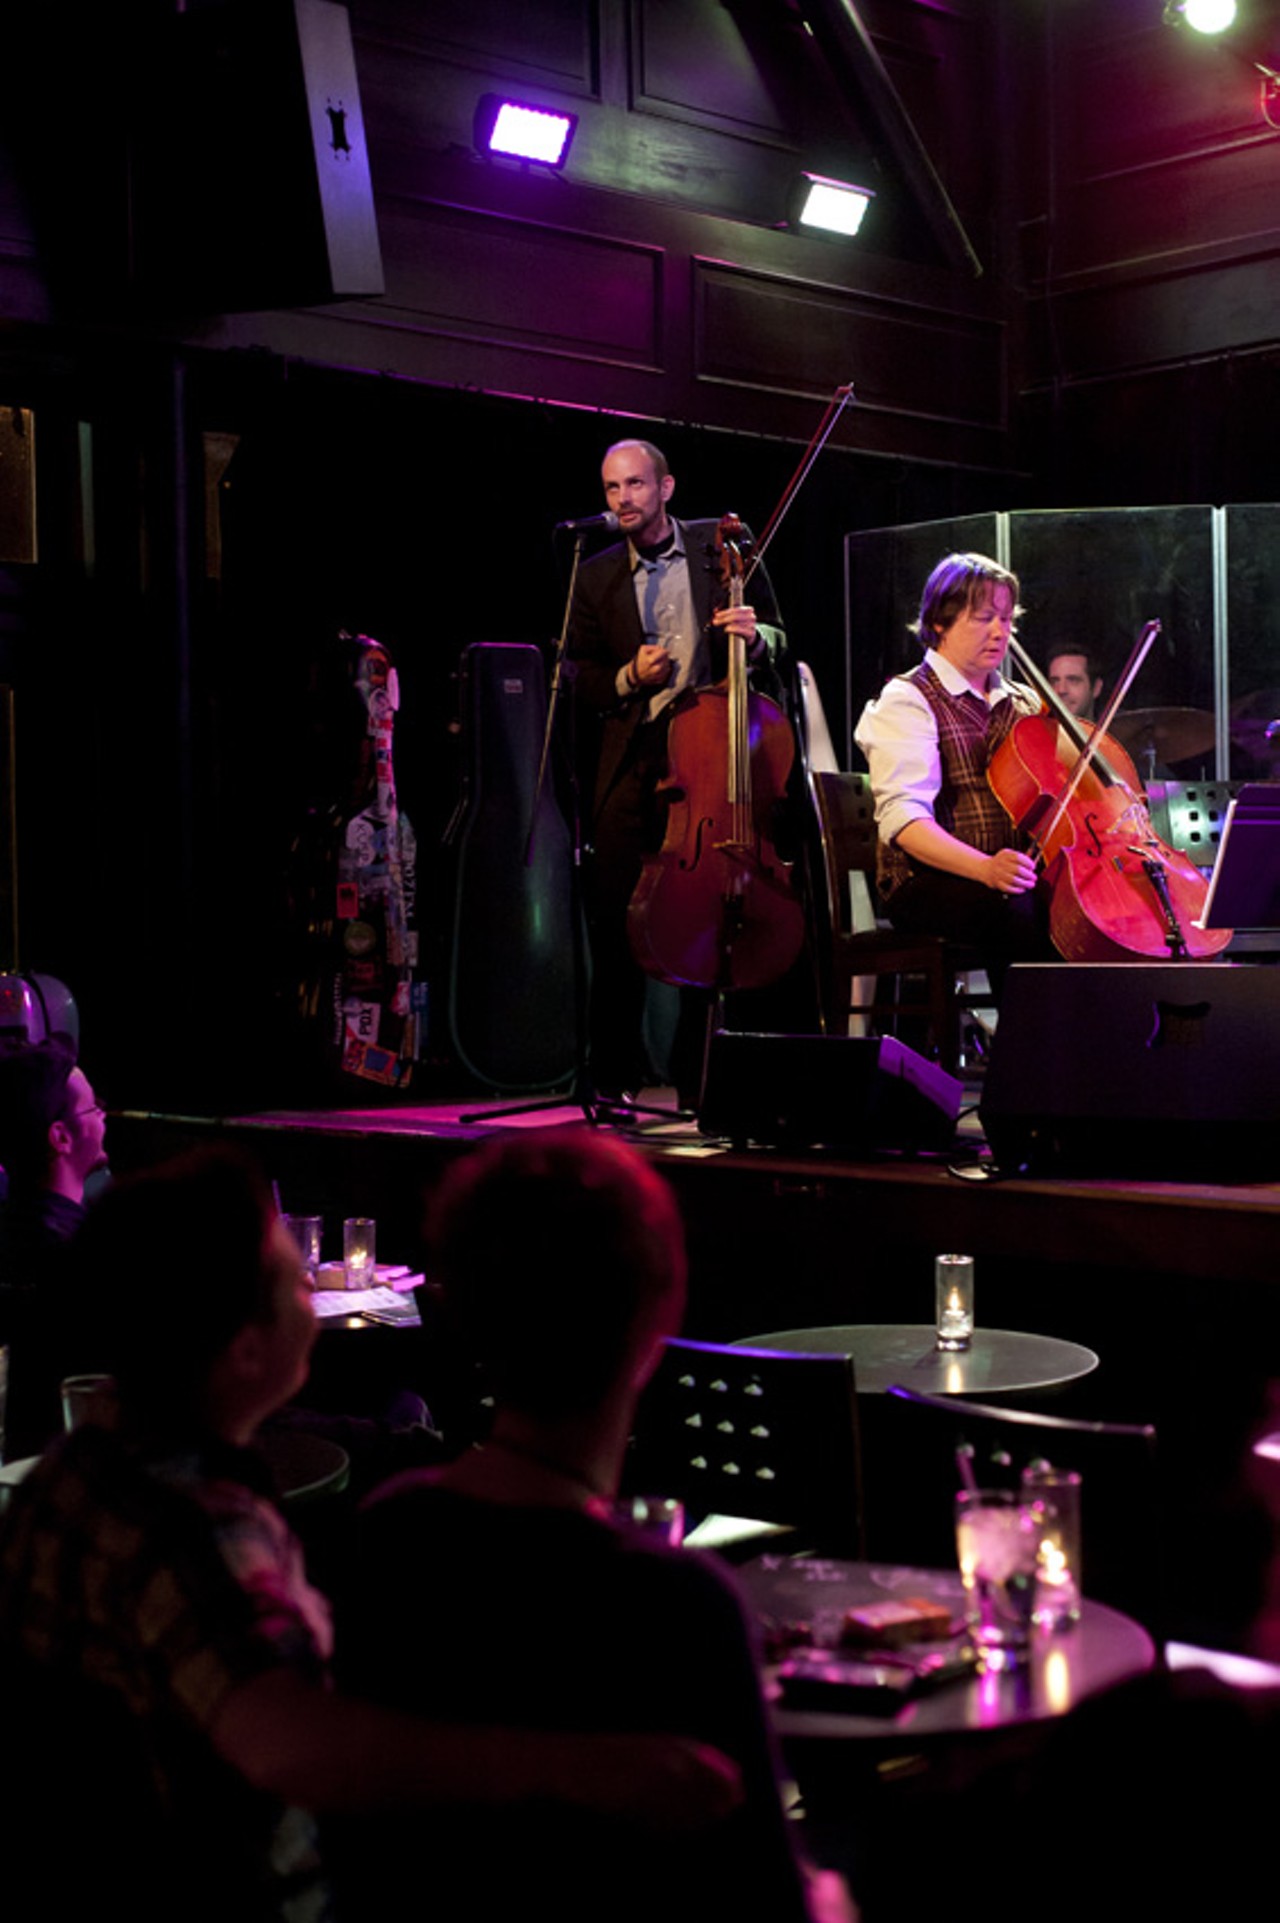 Portland Cello Project performing at the Old Rock House in St. Louis on May 8th.